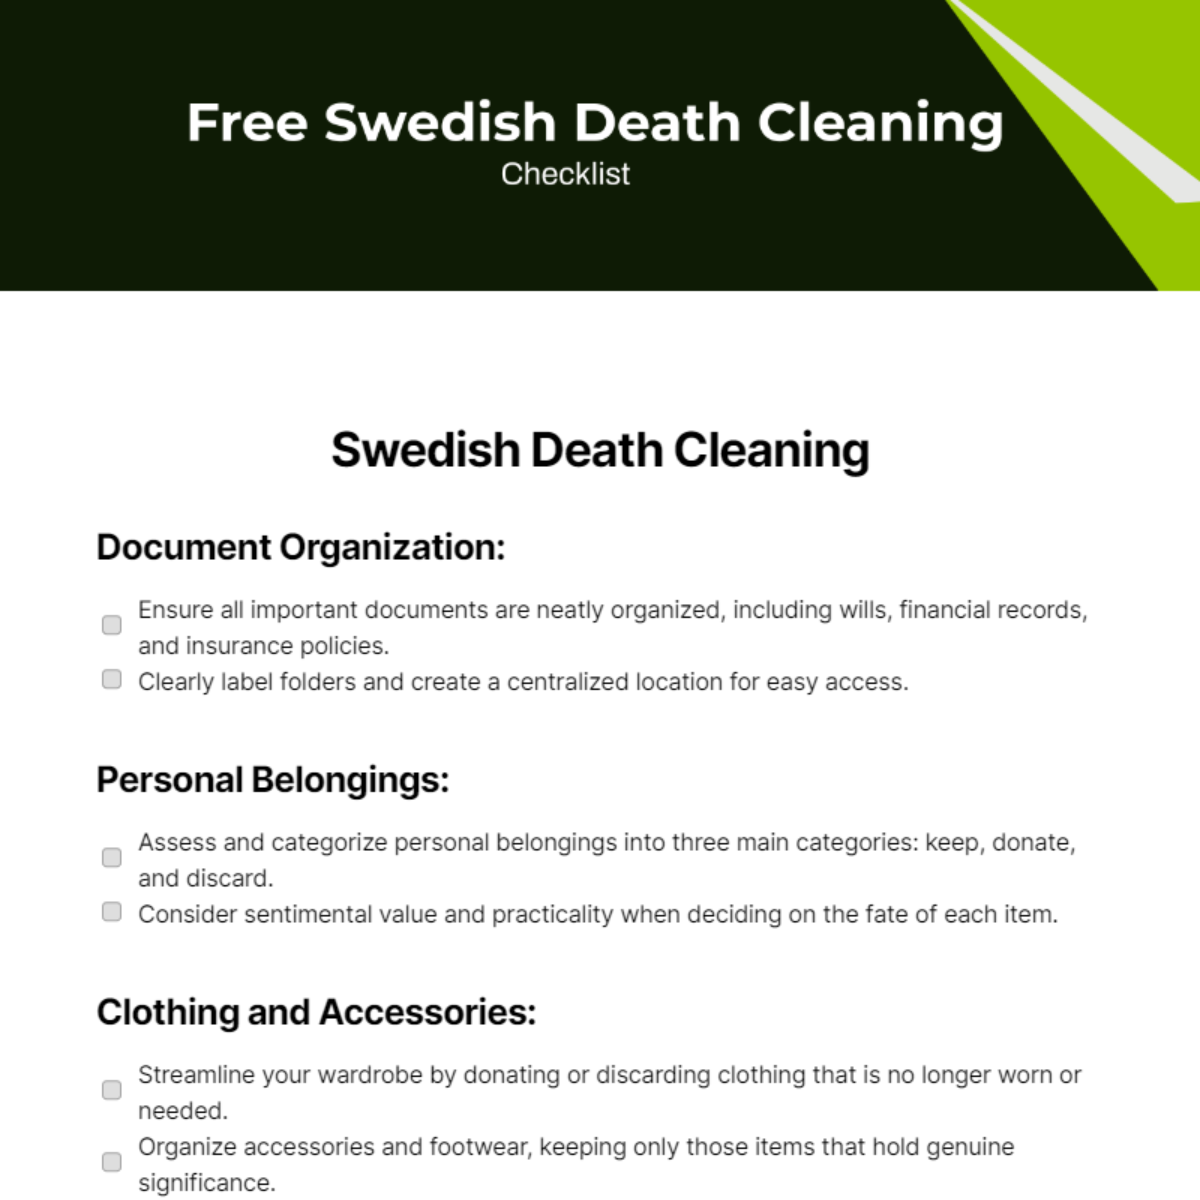 Free Swedish Death Cleaning Checklist Template